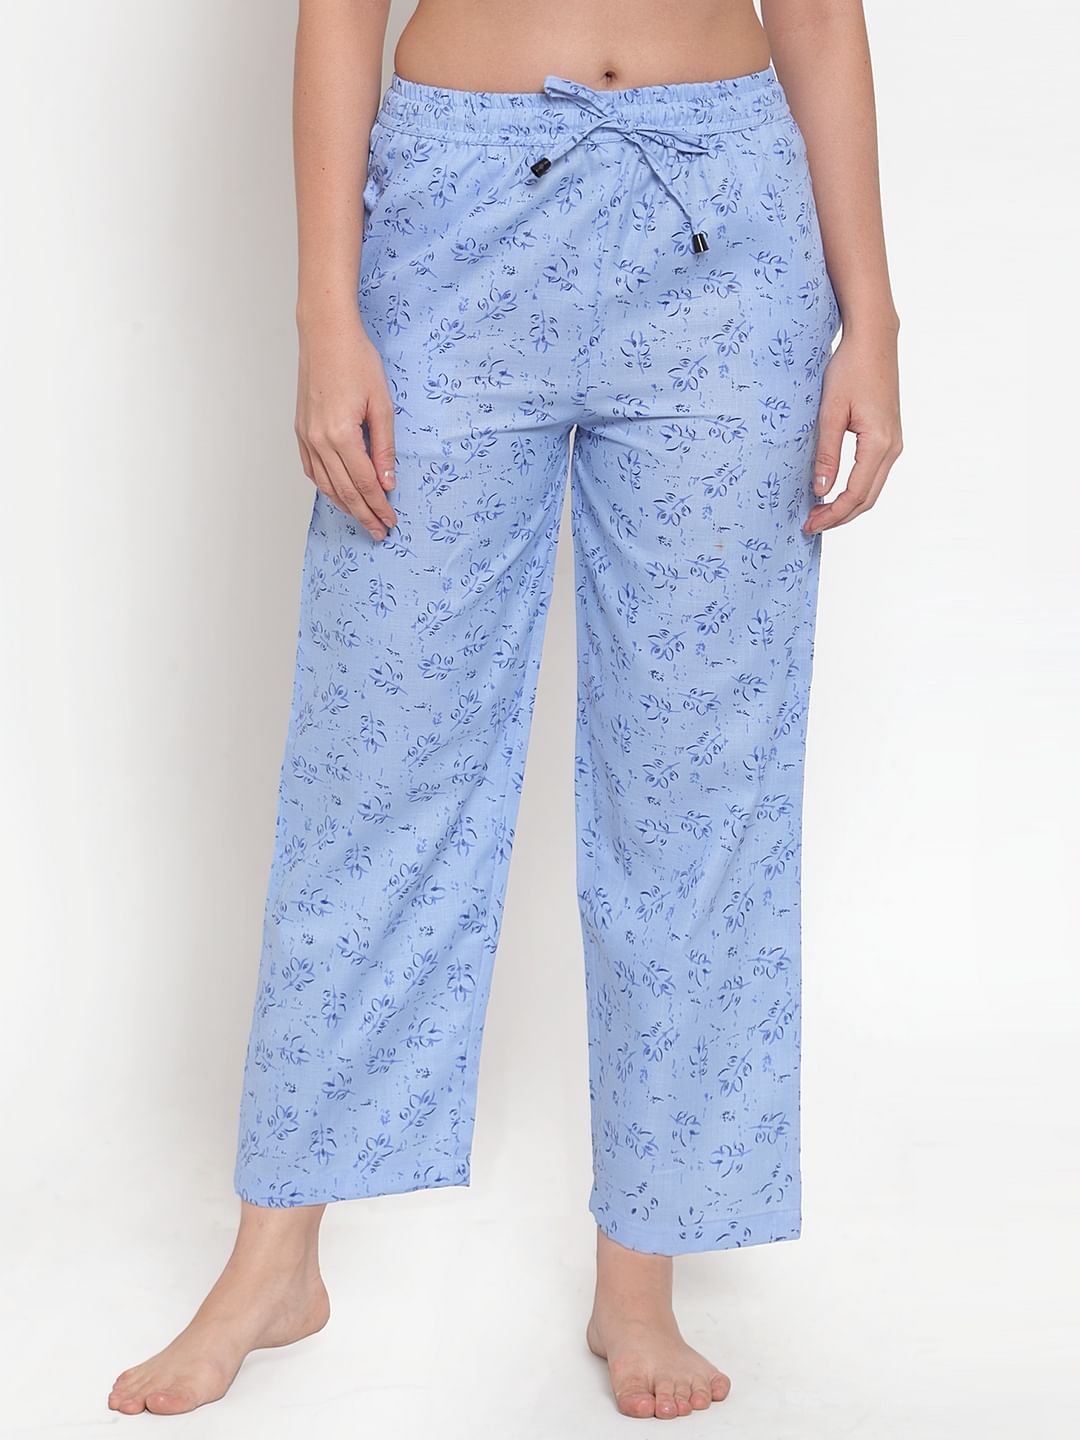 Pyjama Party Sets  Buy Pyjama Party Cereal Killer Button Down Pj Set   Pure Cotton Pj Set With Notched Collar  Blue Online  Nykaa Fashion